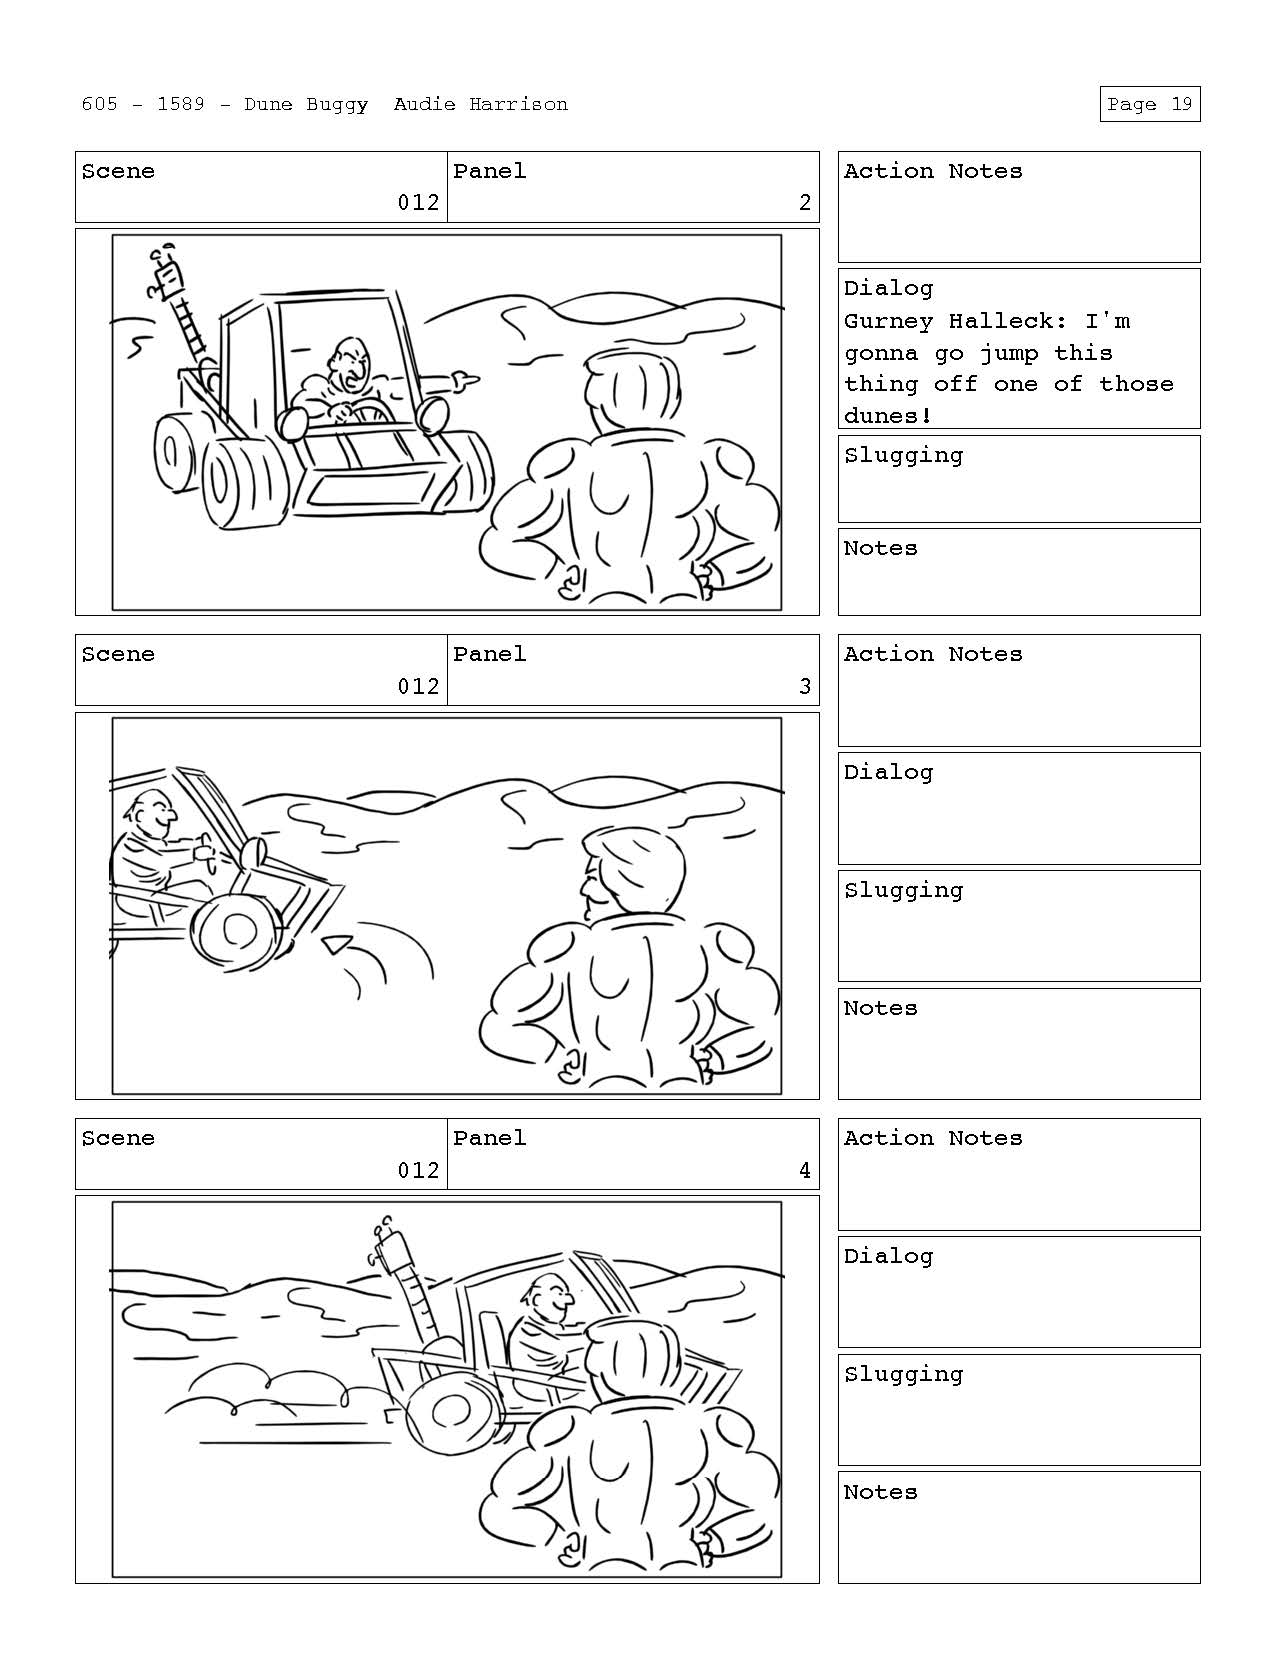 Dune_Buggy_Page_20.jpg